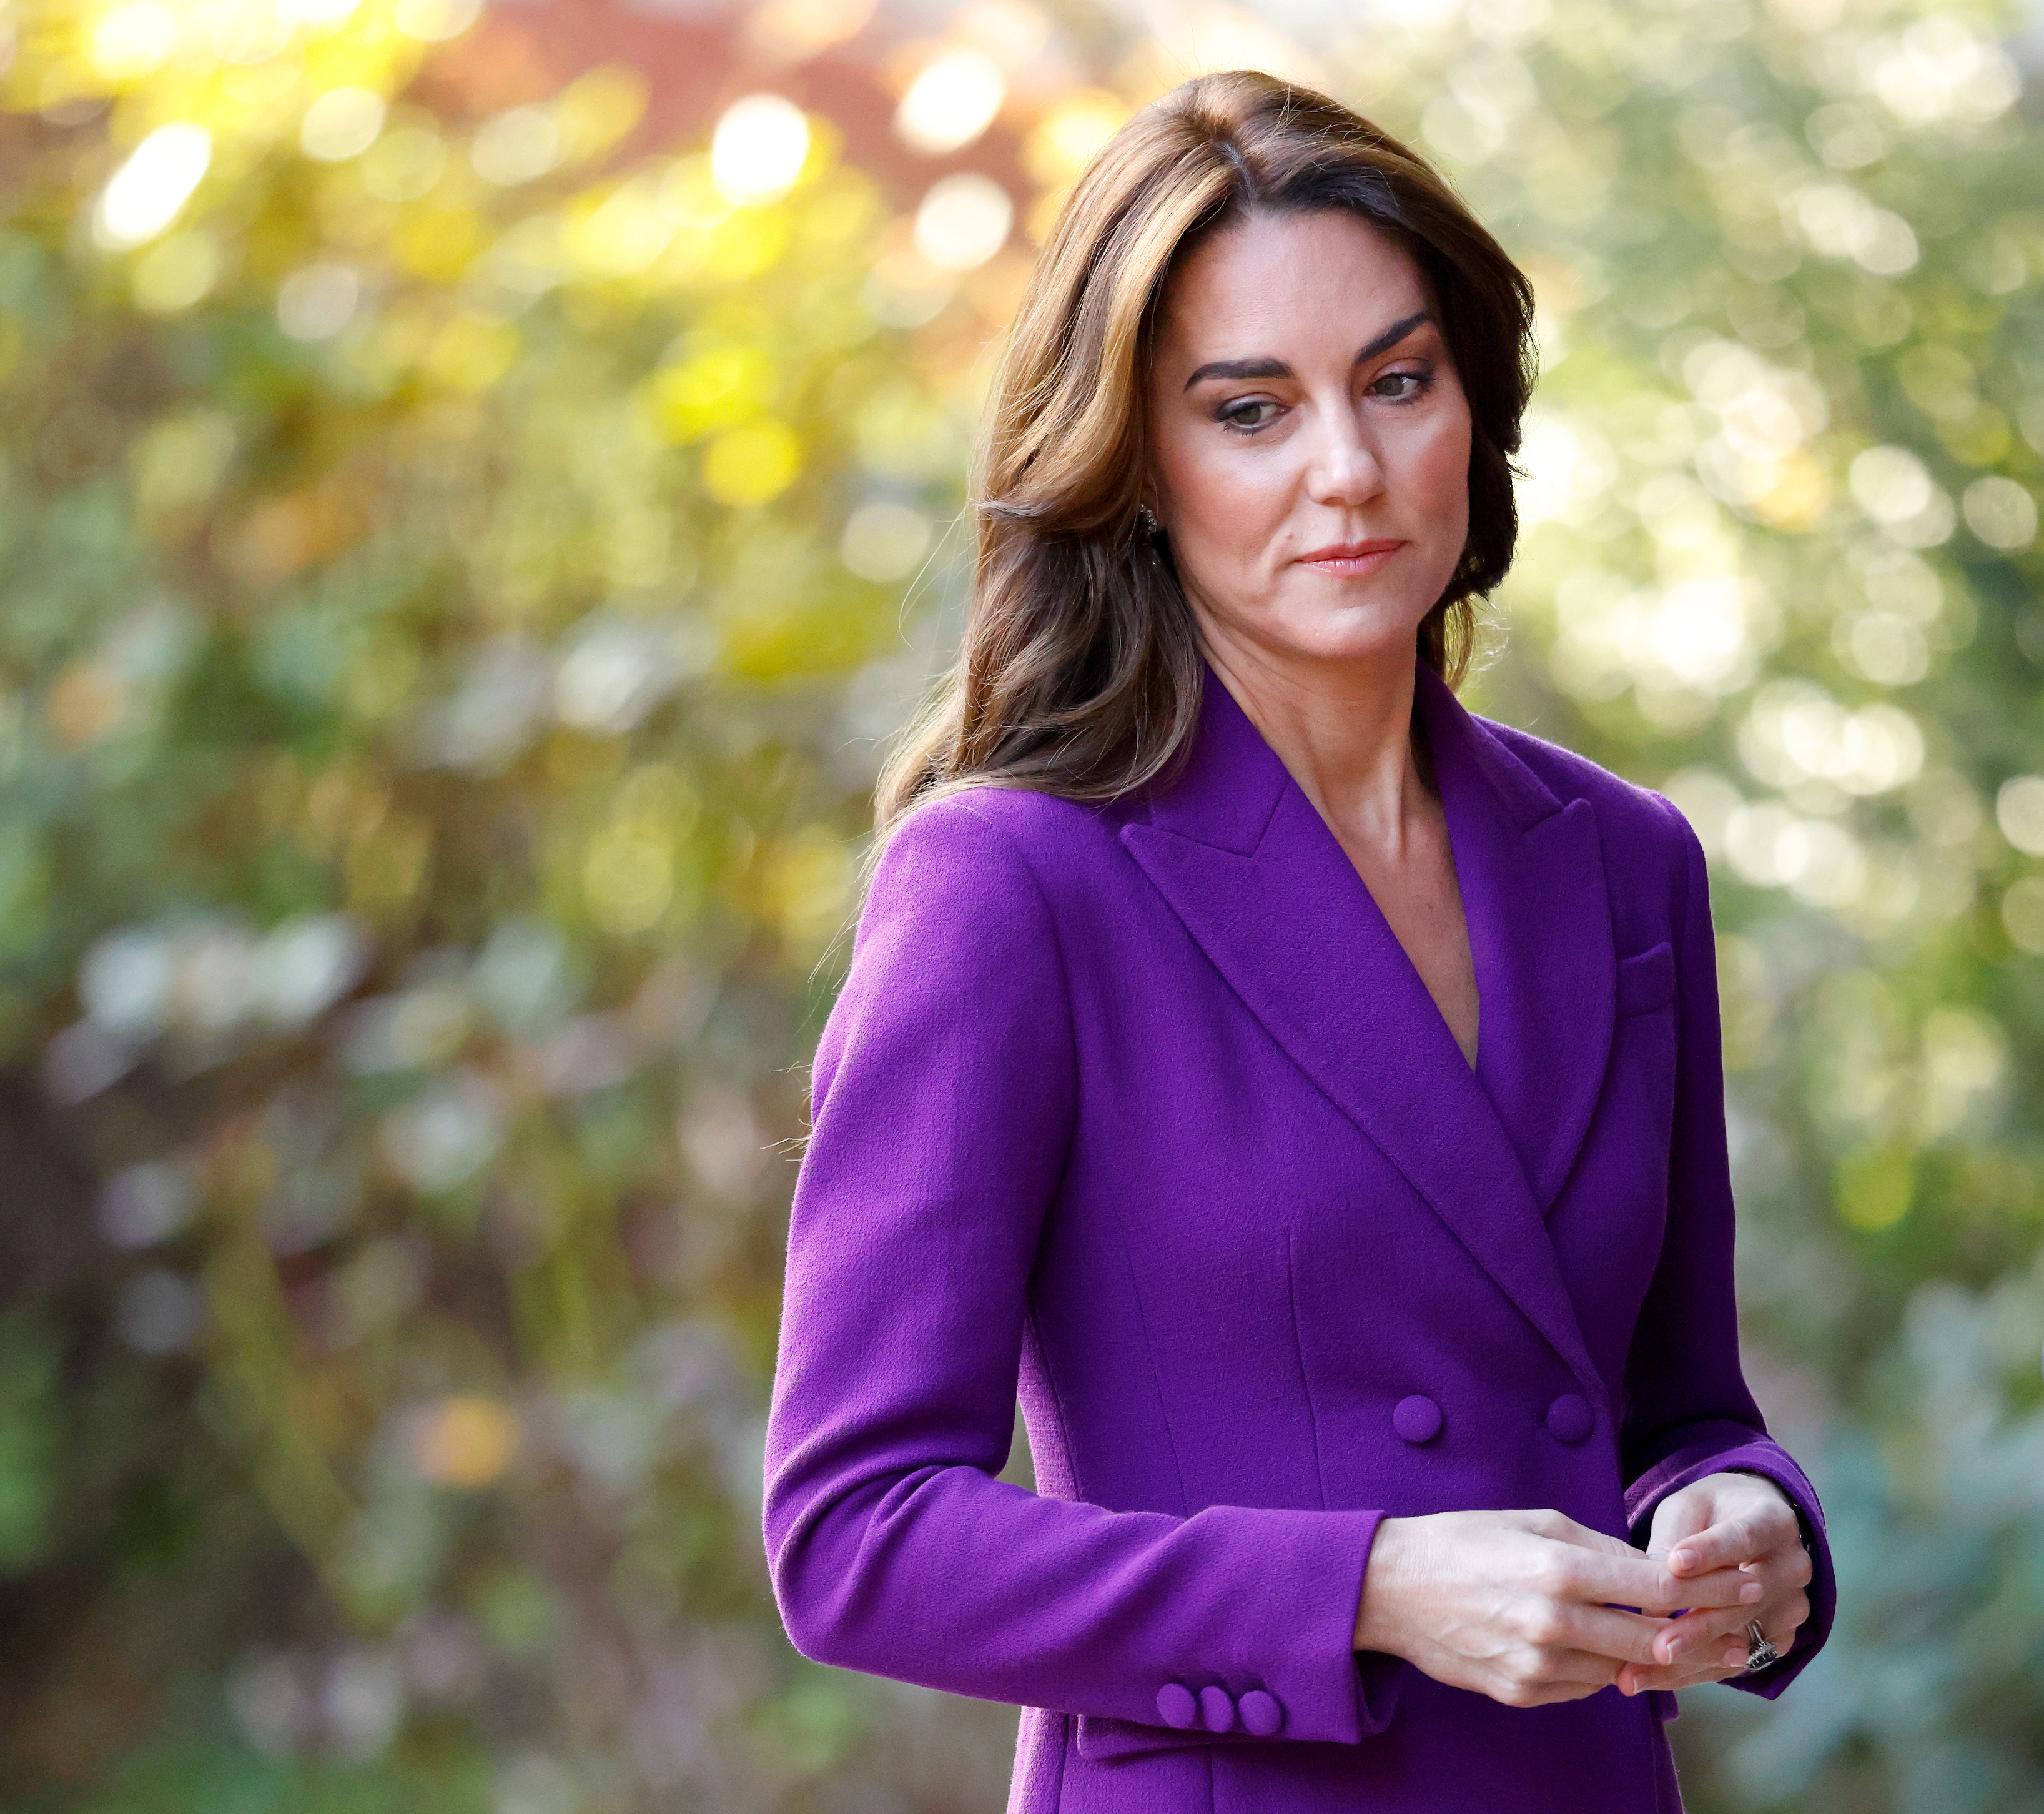 Woman in a purple blazer stands outdoors, looking thoughtful